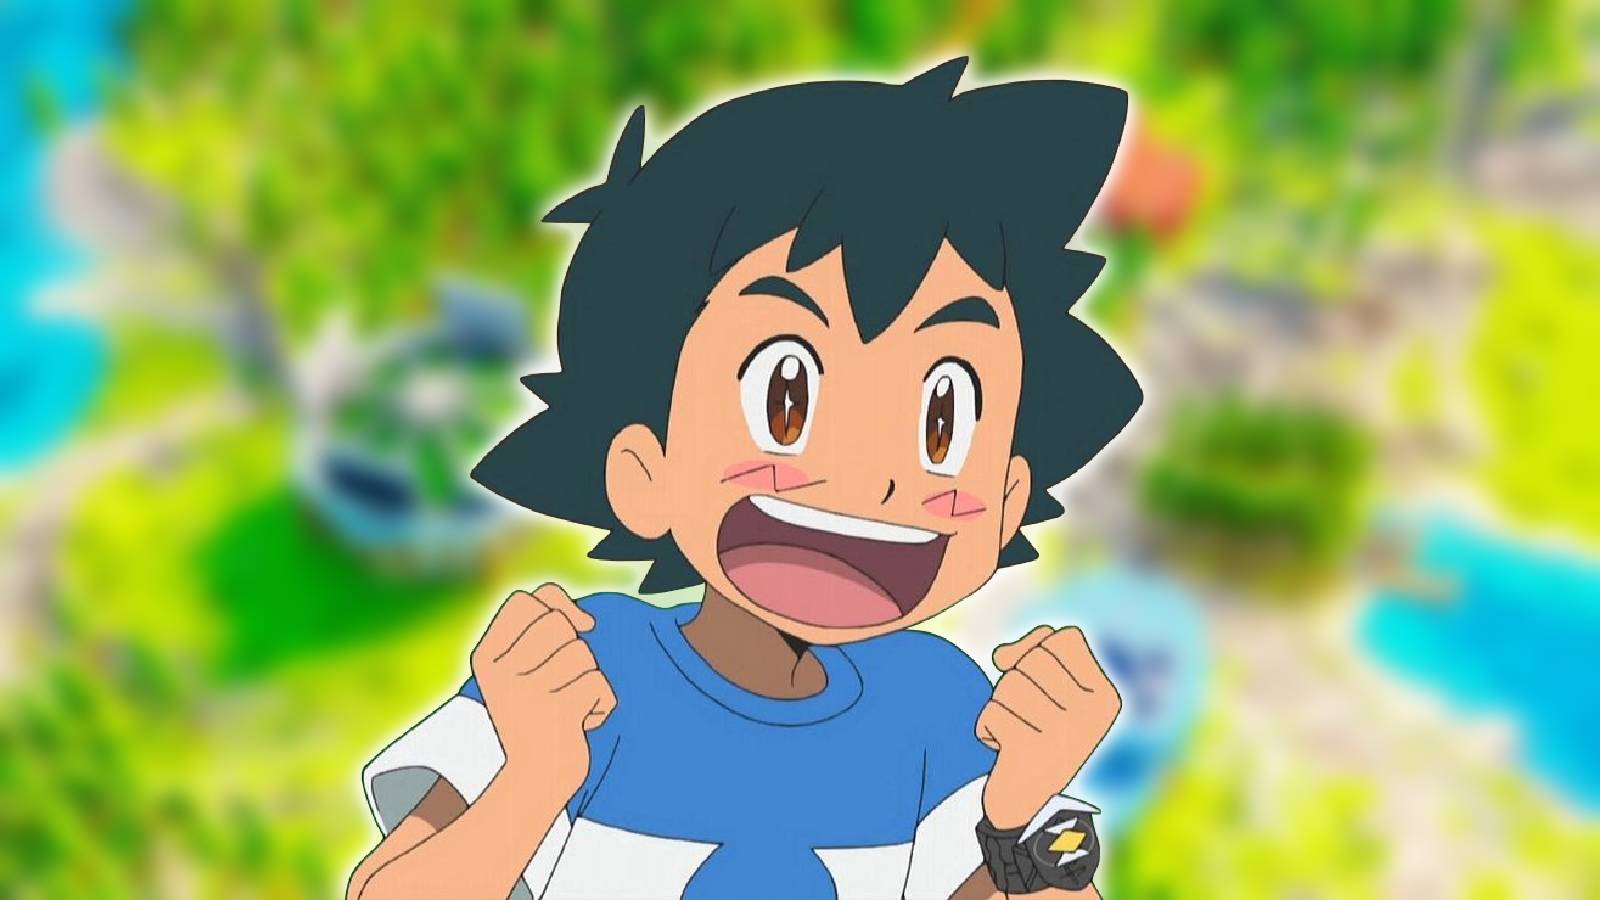 In the foreground Ash Ketchum looks excited, while the background shows a bluured image of a minecraft world